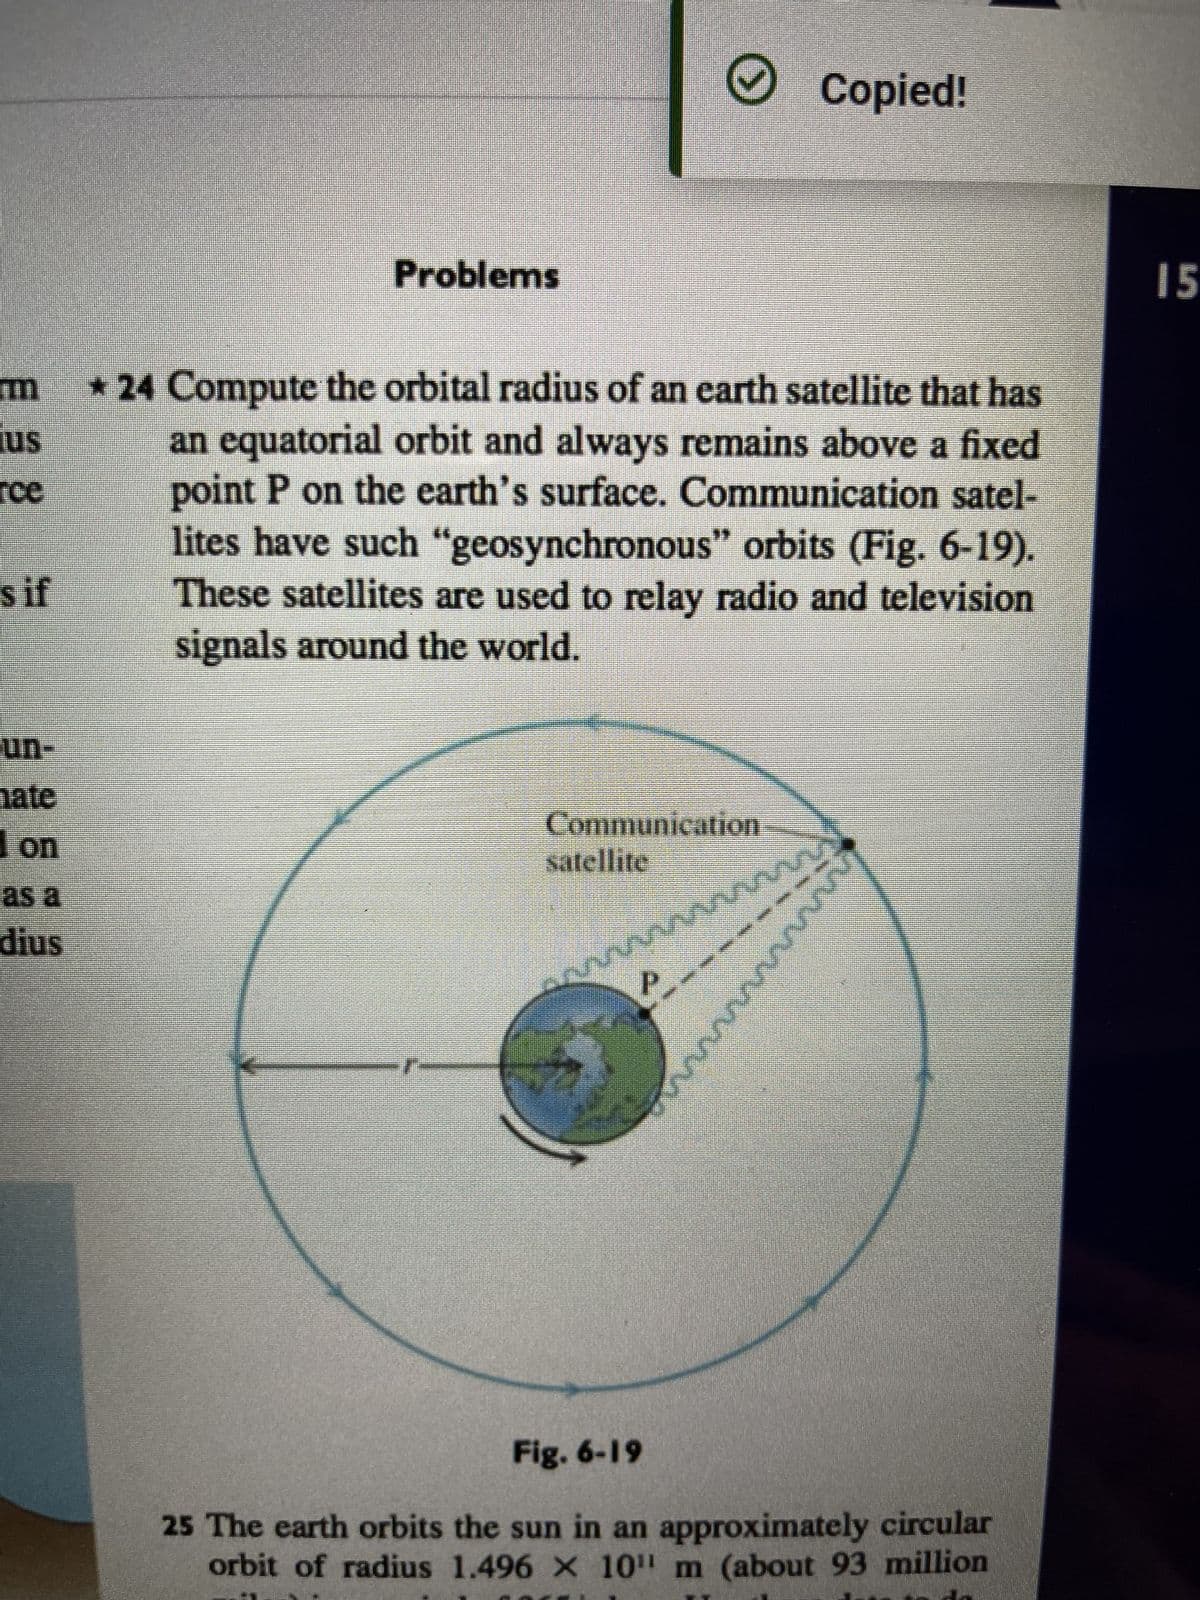 Copied!
Problems
us
rce
*24 Compute the orbital radius of an earth satellite that has
an equatorial orbit and always remains above a fixed
point P on the earth's surface. Communication satel-
lites have such "geosynchronous" orbits (Fig. 6-19).
These satellites are used to relay radio and television
signals around the world.
s if
un-
hate
Communication
satellite
wwwwwwww
as a
dius
mmm
Fig. 6-19
25 The earth orbits the sun in an approximately circular
orbit of radius 1.496 X 10" m (about 93 million
15